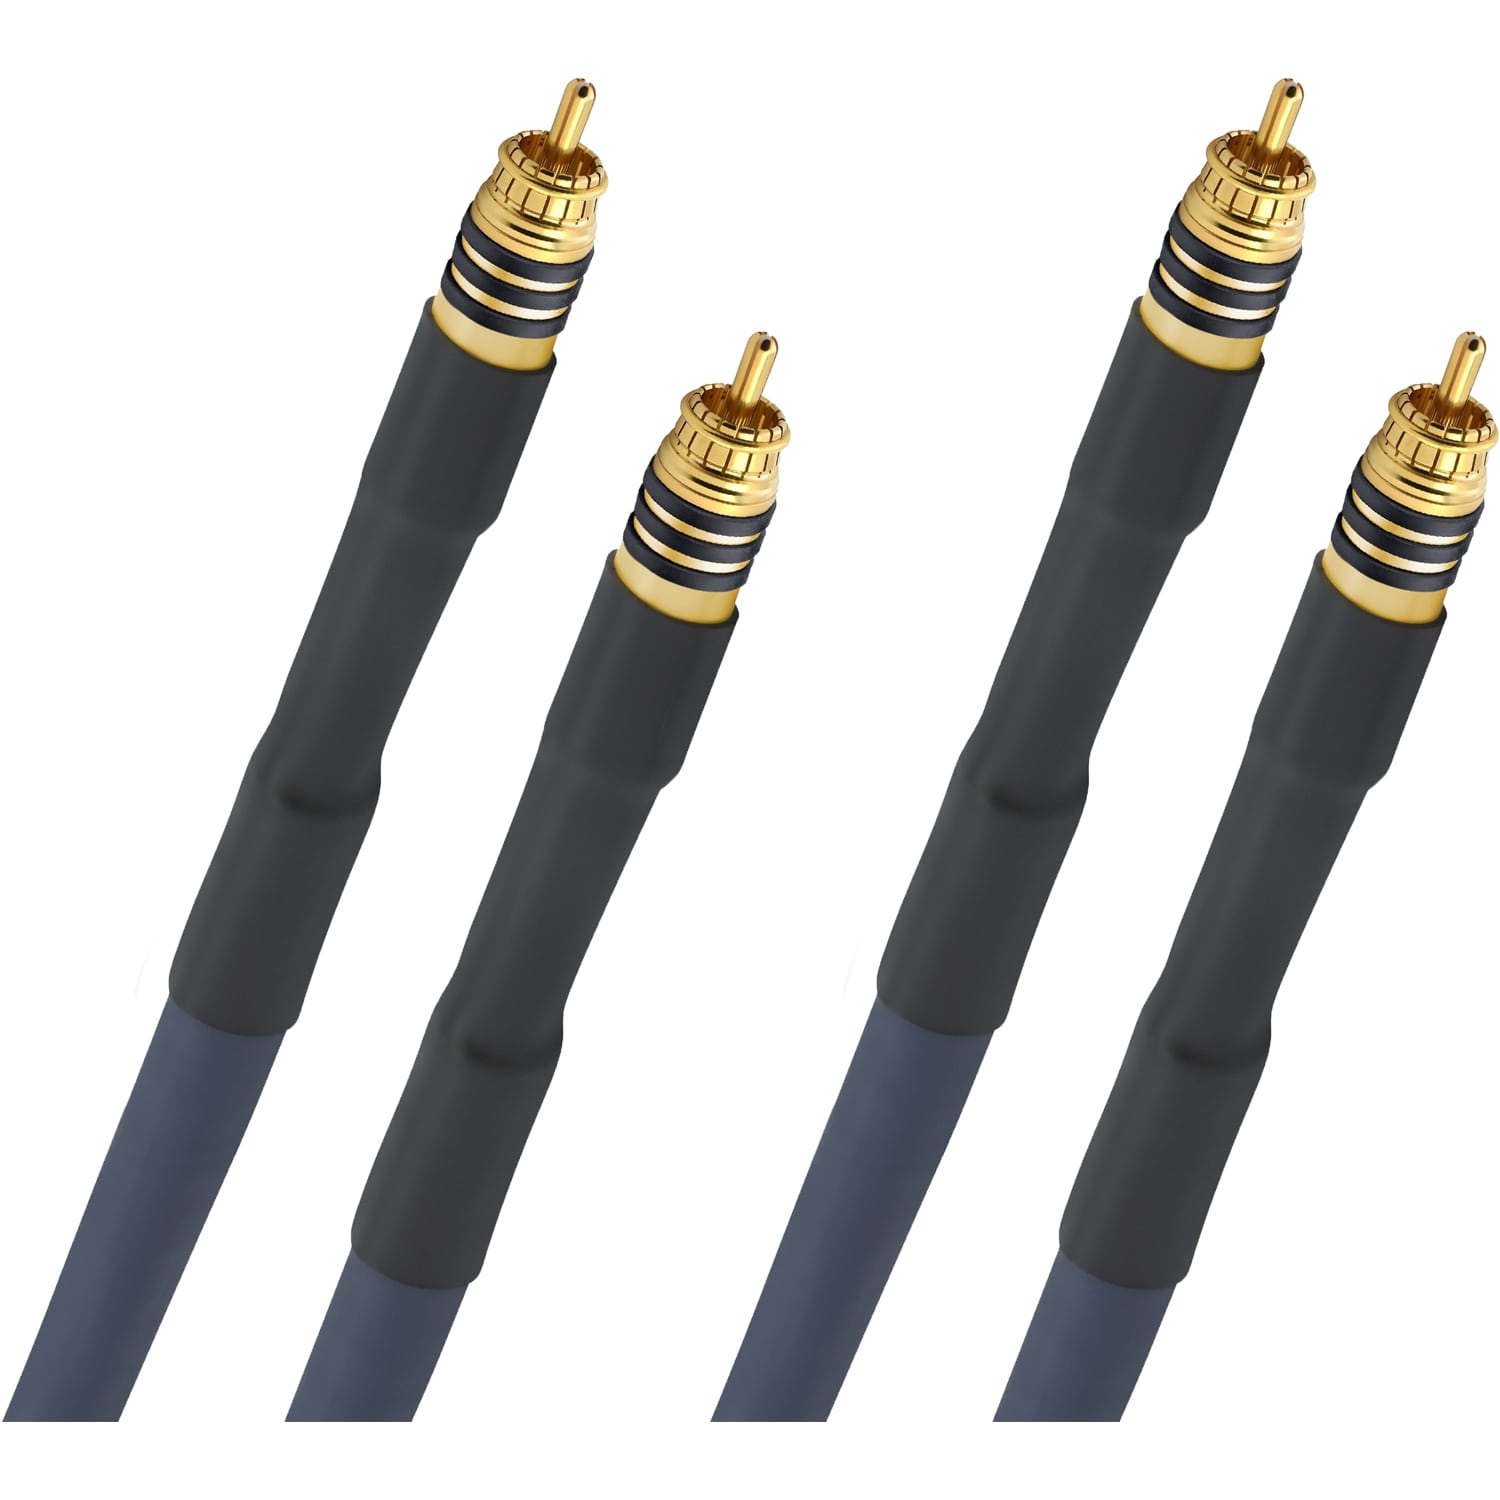 Кабели межблочные аудио Oehlbach STATE OF THE ART XXL Cable RCA, 2x1,50m, gold, D1C13114 кабели межблочные аудио oehlbach state of the art xxl cable xlr 2x1 50m gold d1c13134